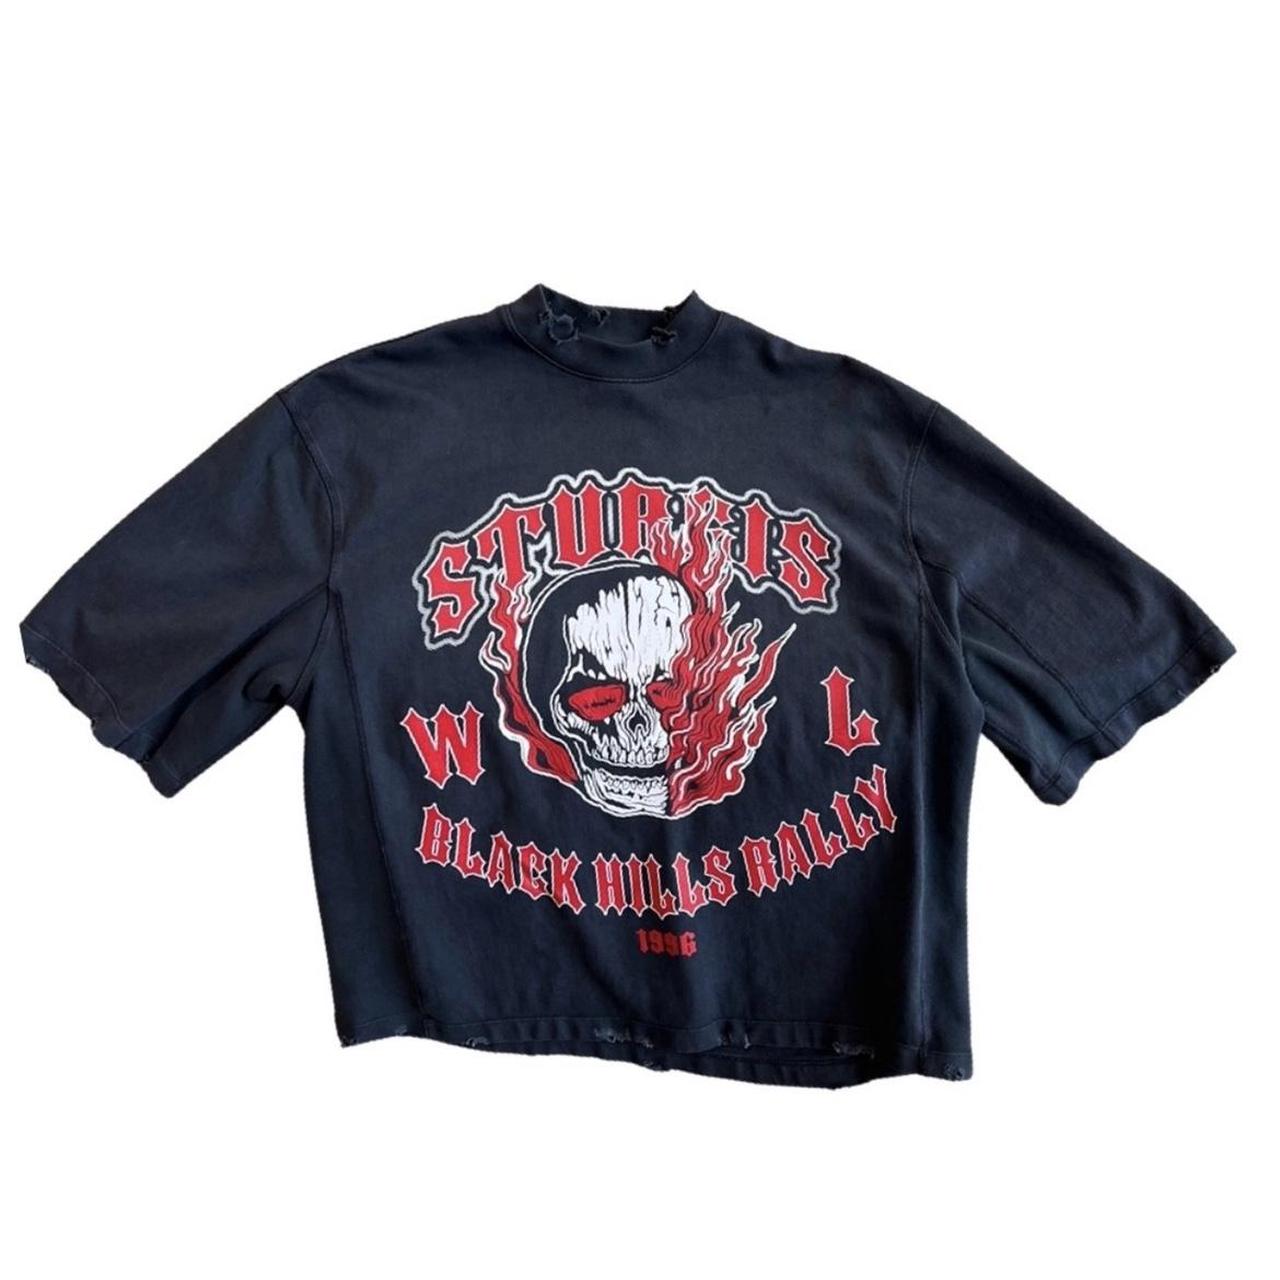 Warren Lotas Sturgis Tee, This was bought at the...